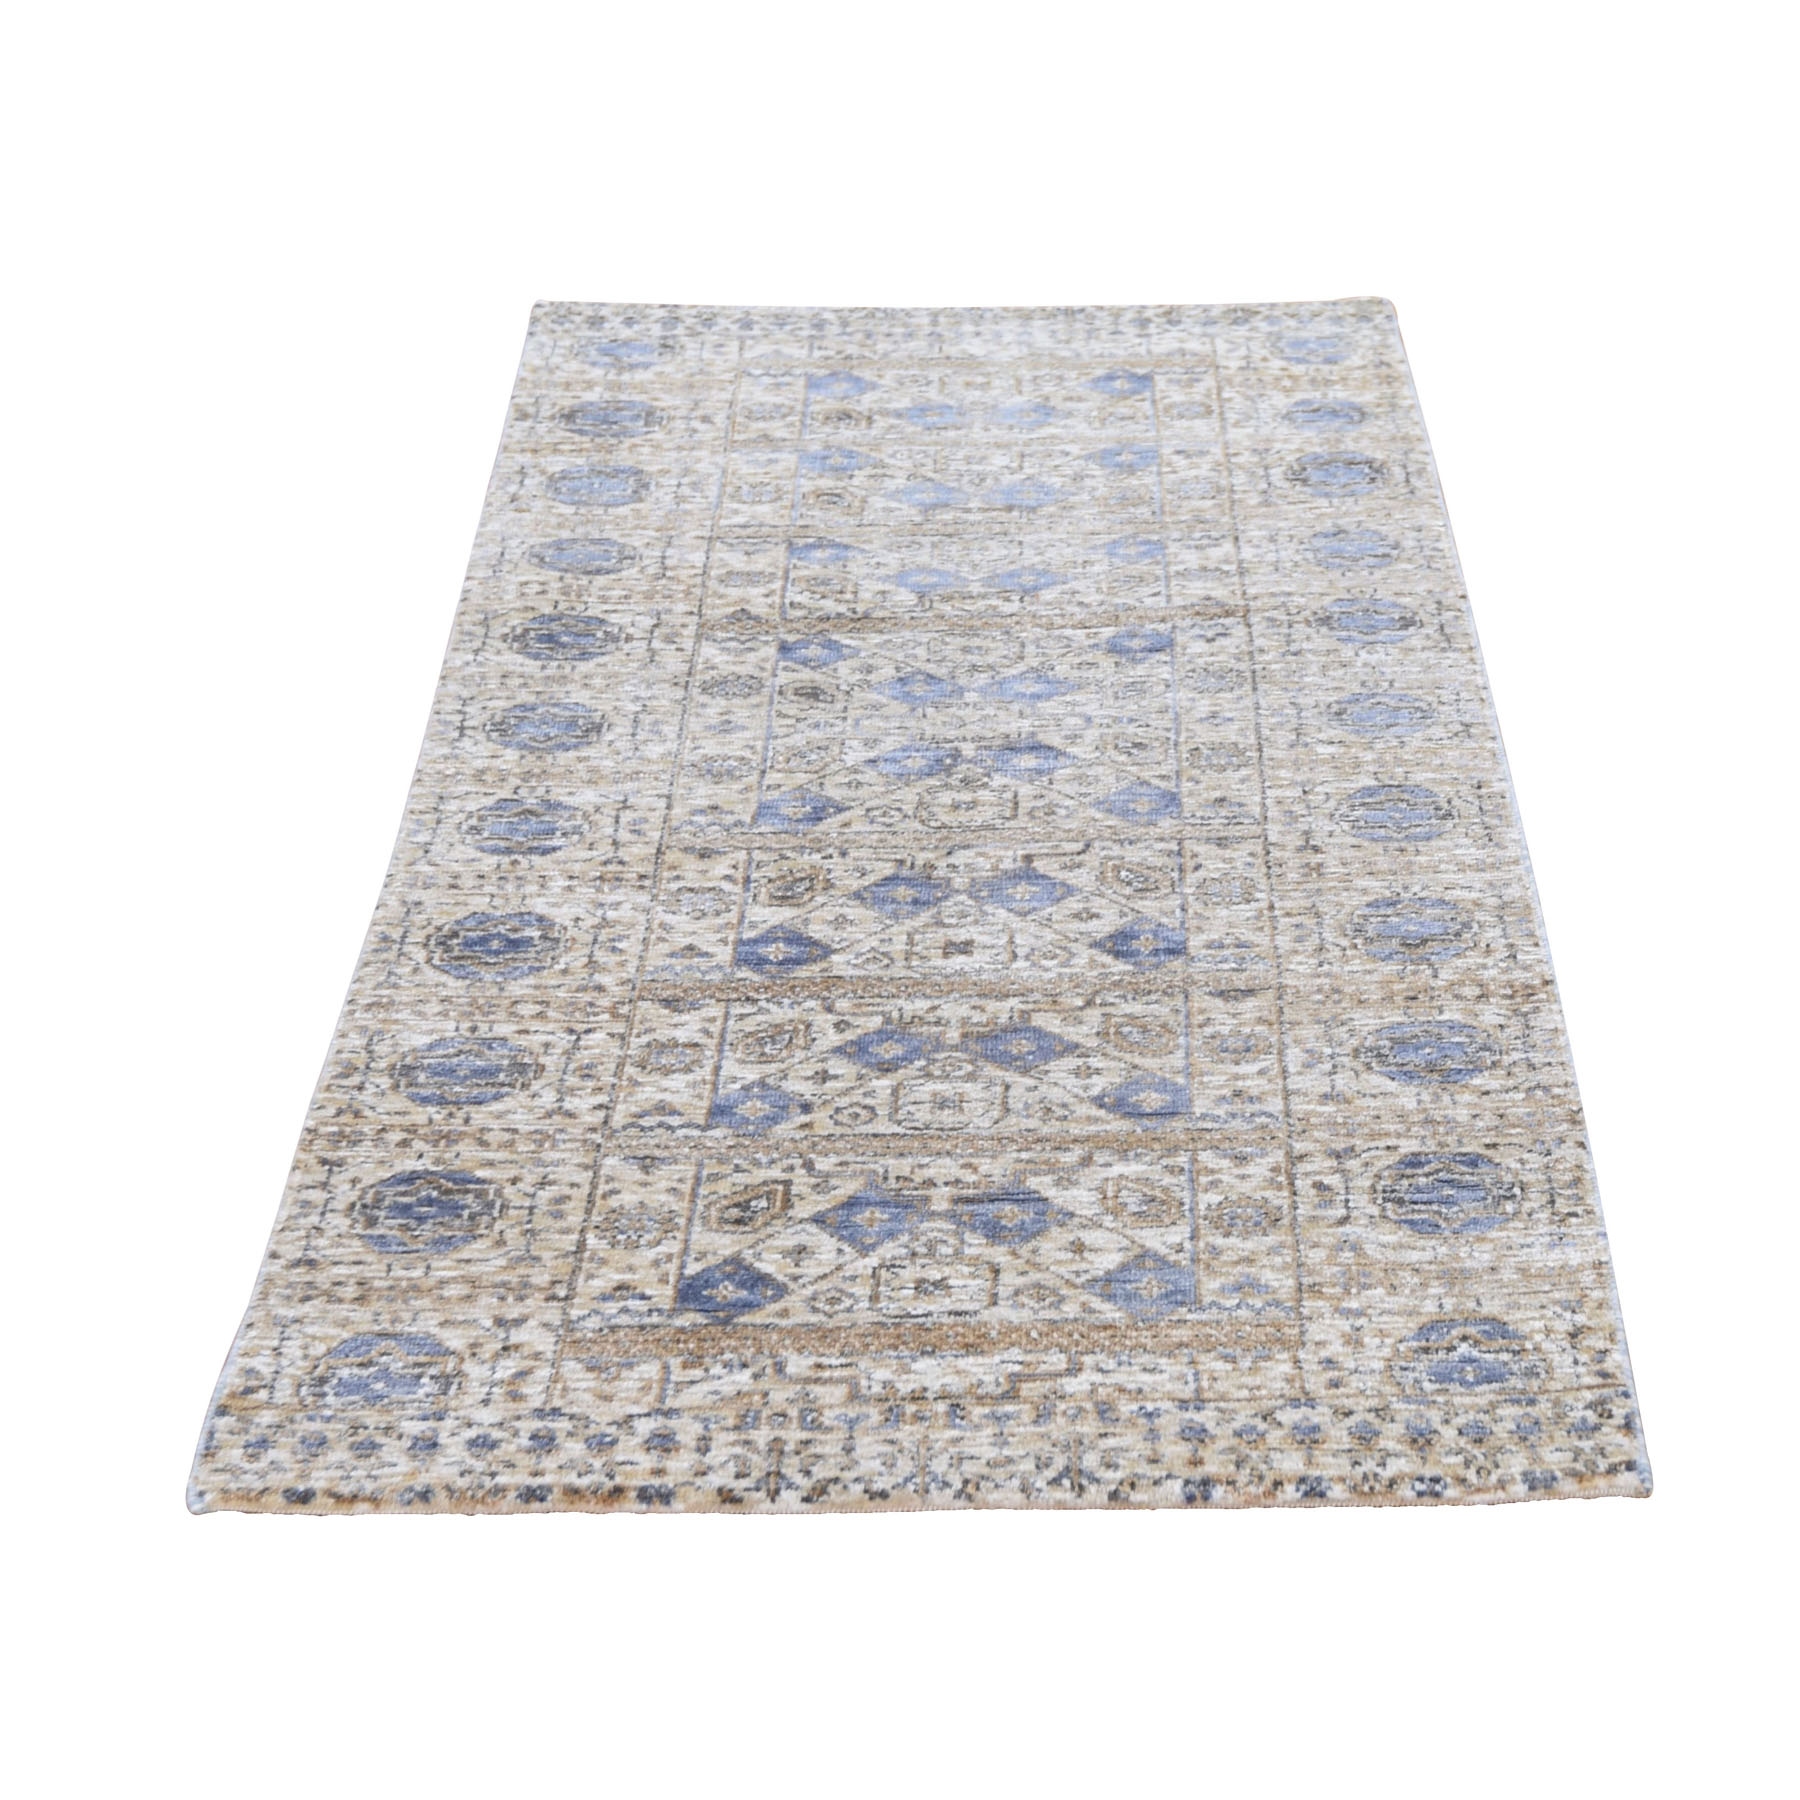 2'7"X6'1" Silk With Textured Wool Mamluk Design Runner Hand Knotted Oriental Rug moad9067